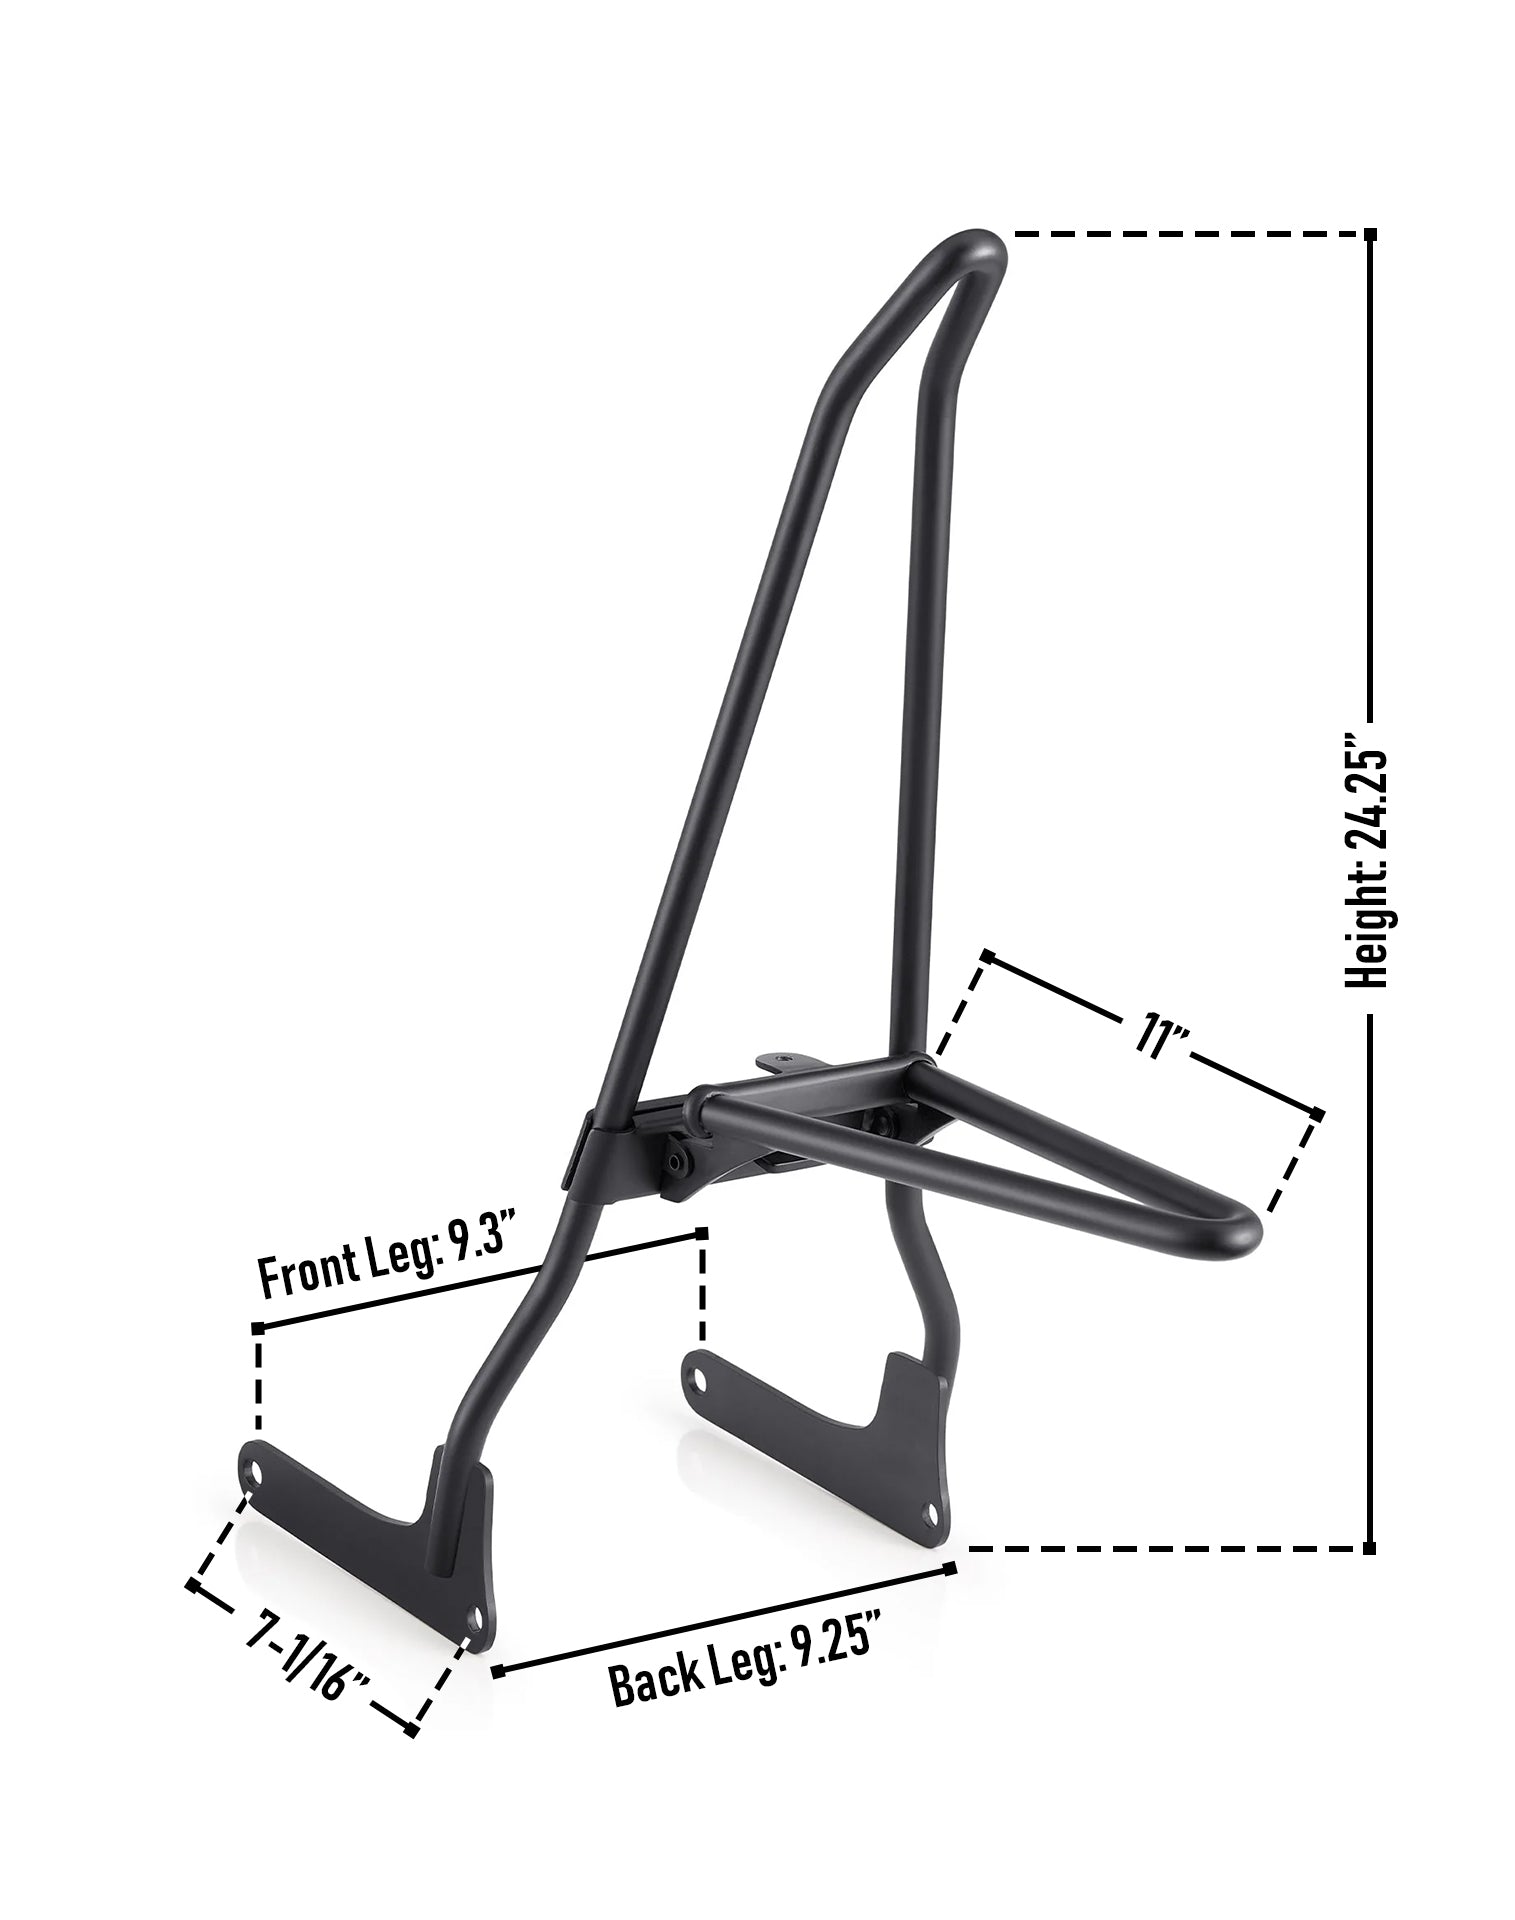 Iron Born Blade 25" Sissy Bar with Foldable Luggage Rack for Harley Softail Heritage FLHC/S Matte Black Dimension